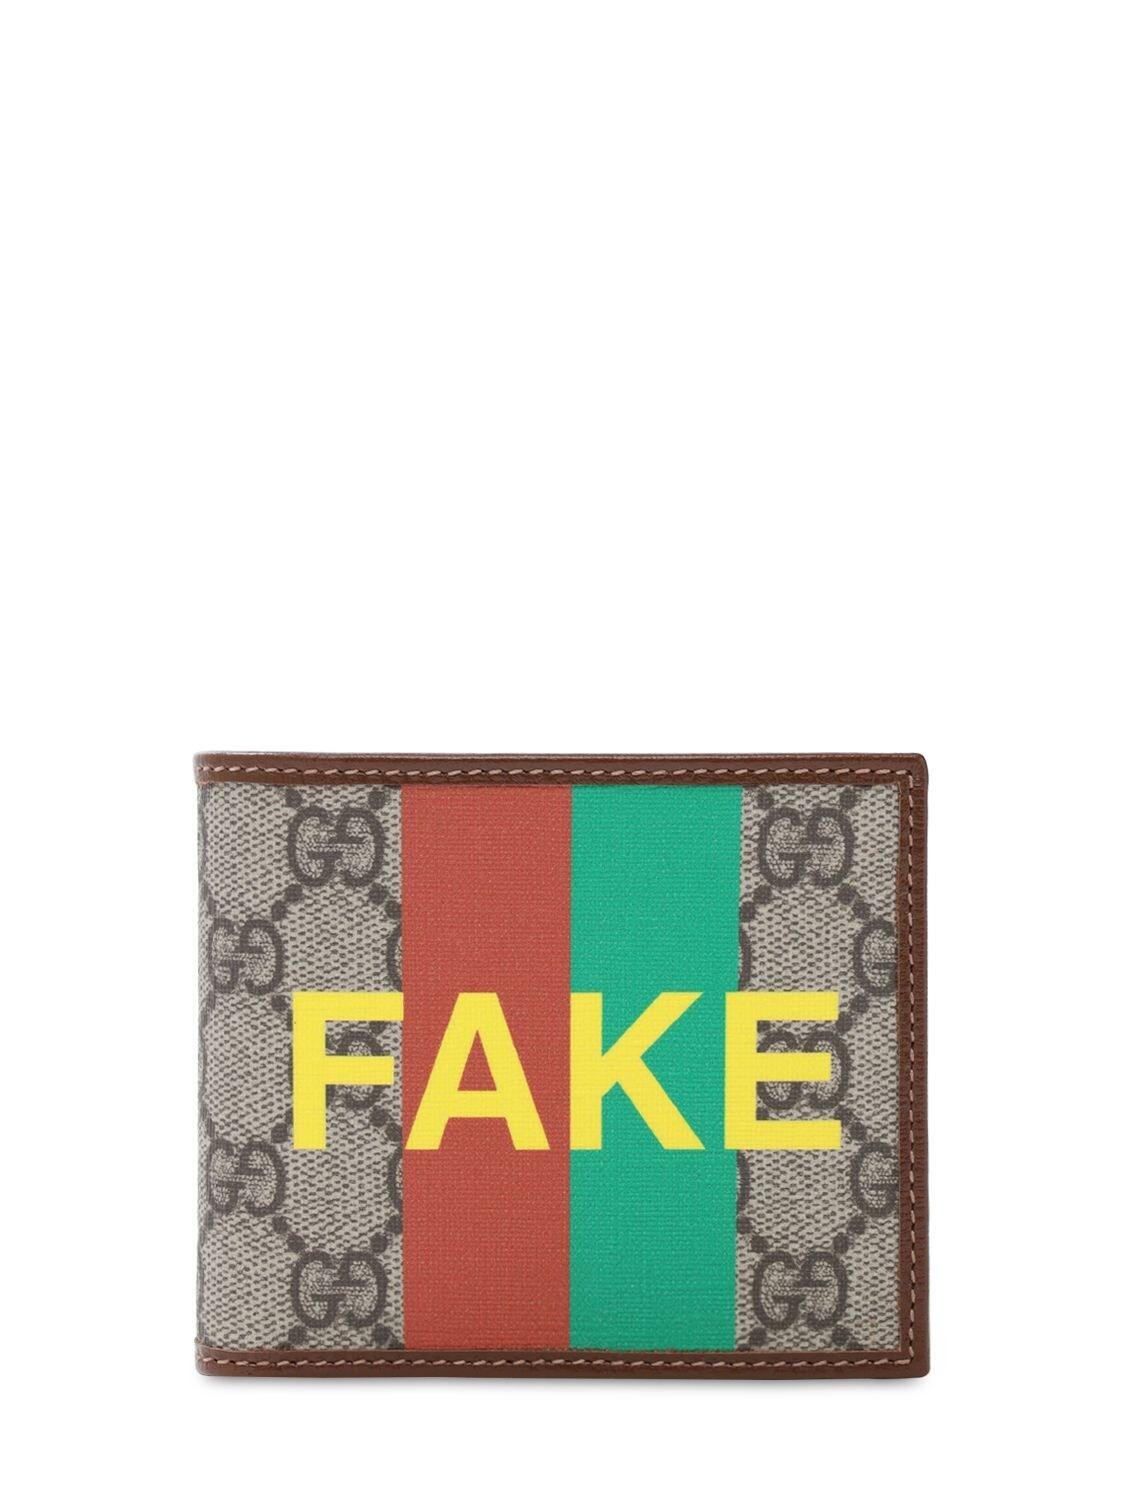 Gucci 'fake/not' Print Billfold Wallet in Natural for Men | Lyst